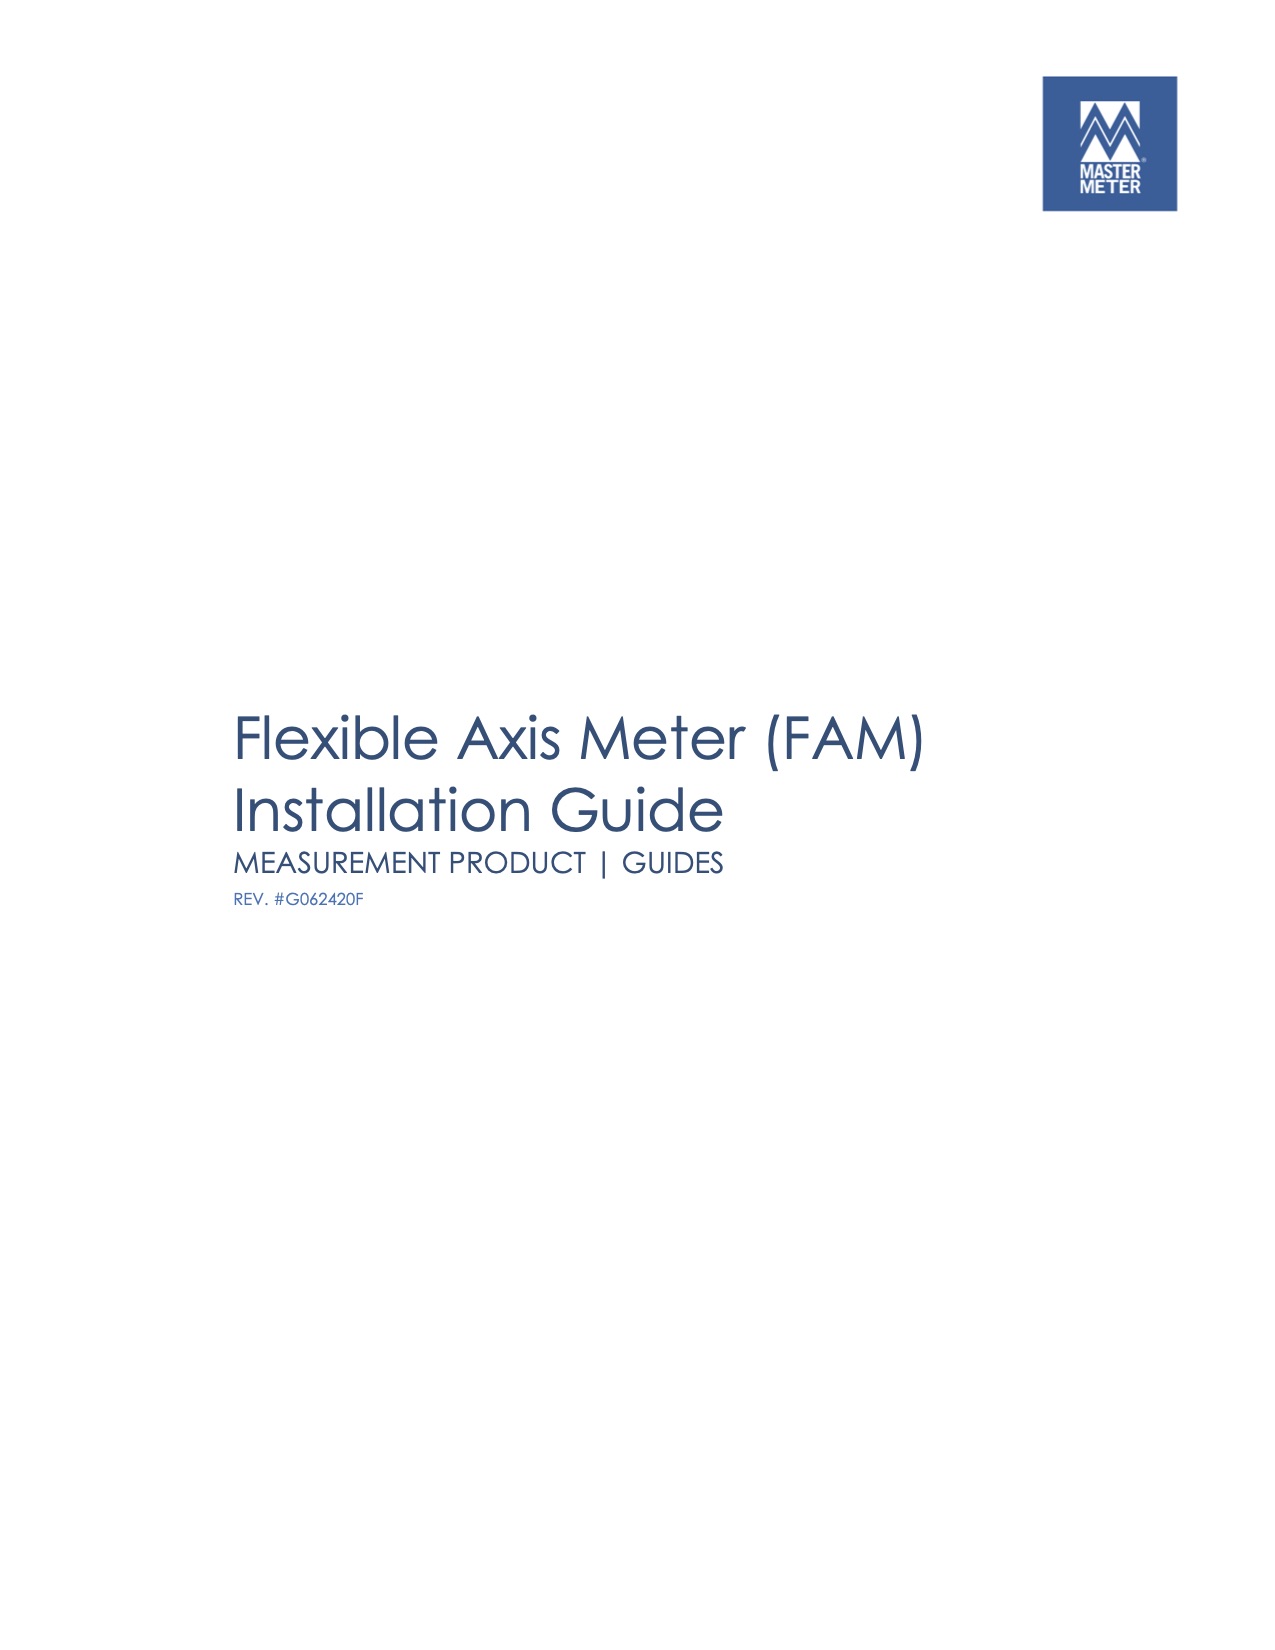 Flexible Axis Meter (FAM) Installation Guide 